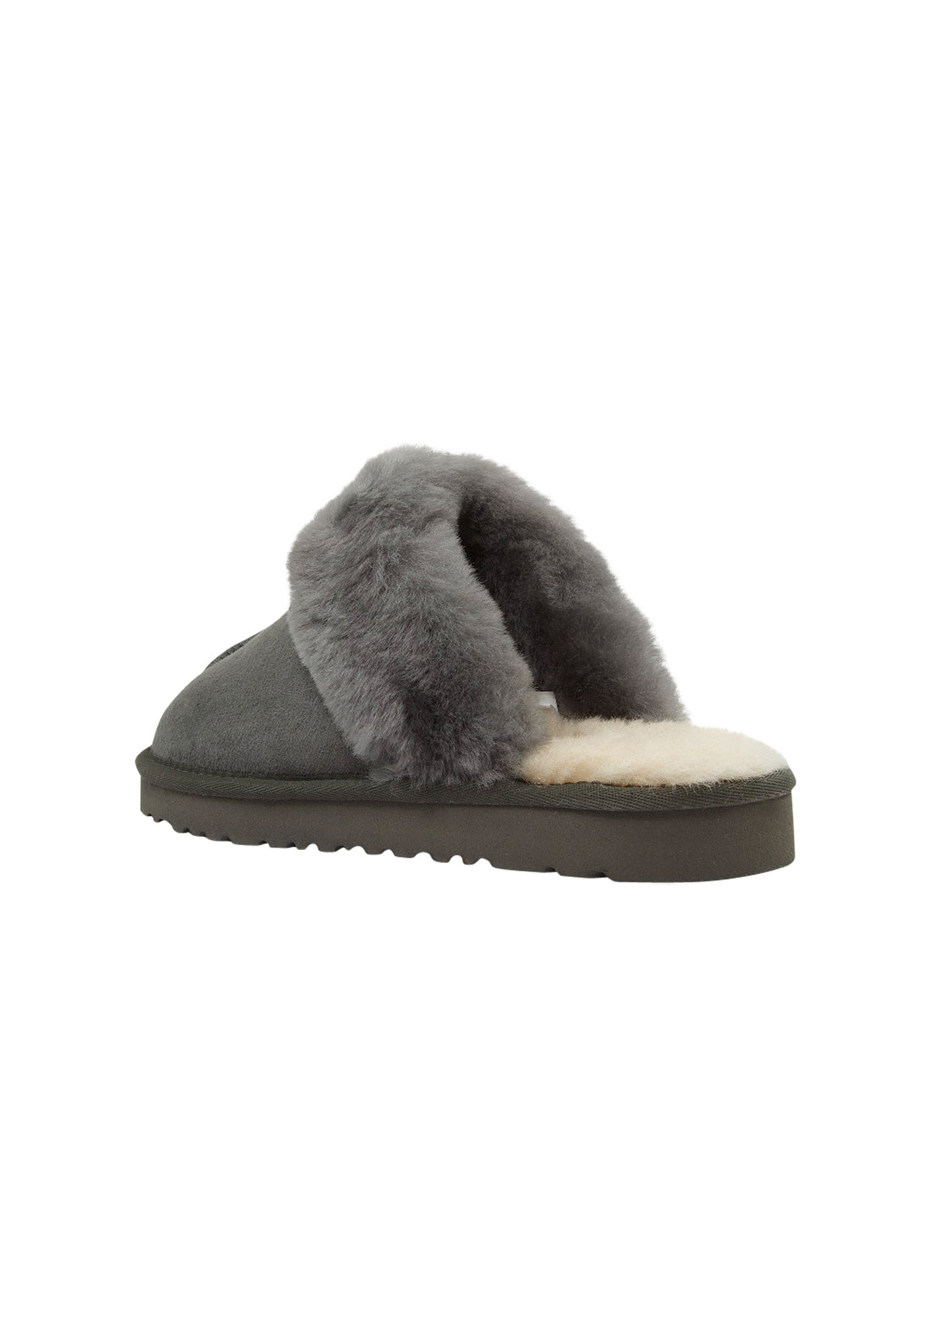 uggs with fur trim